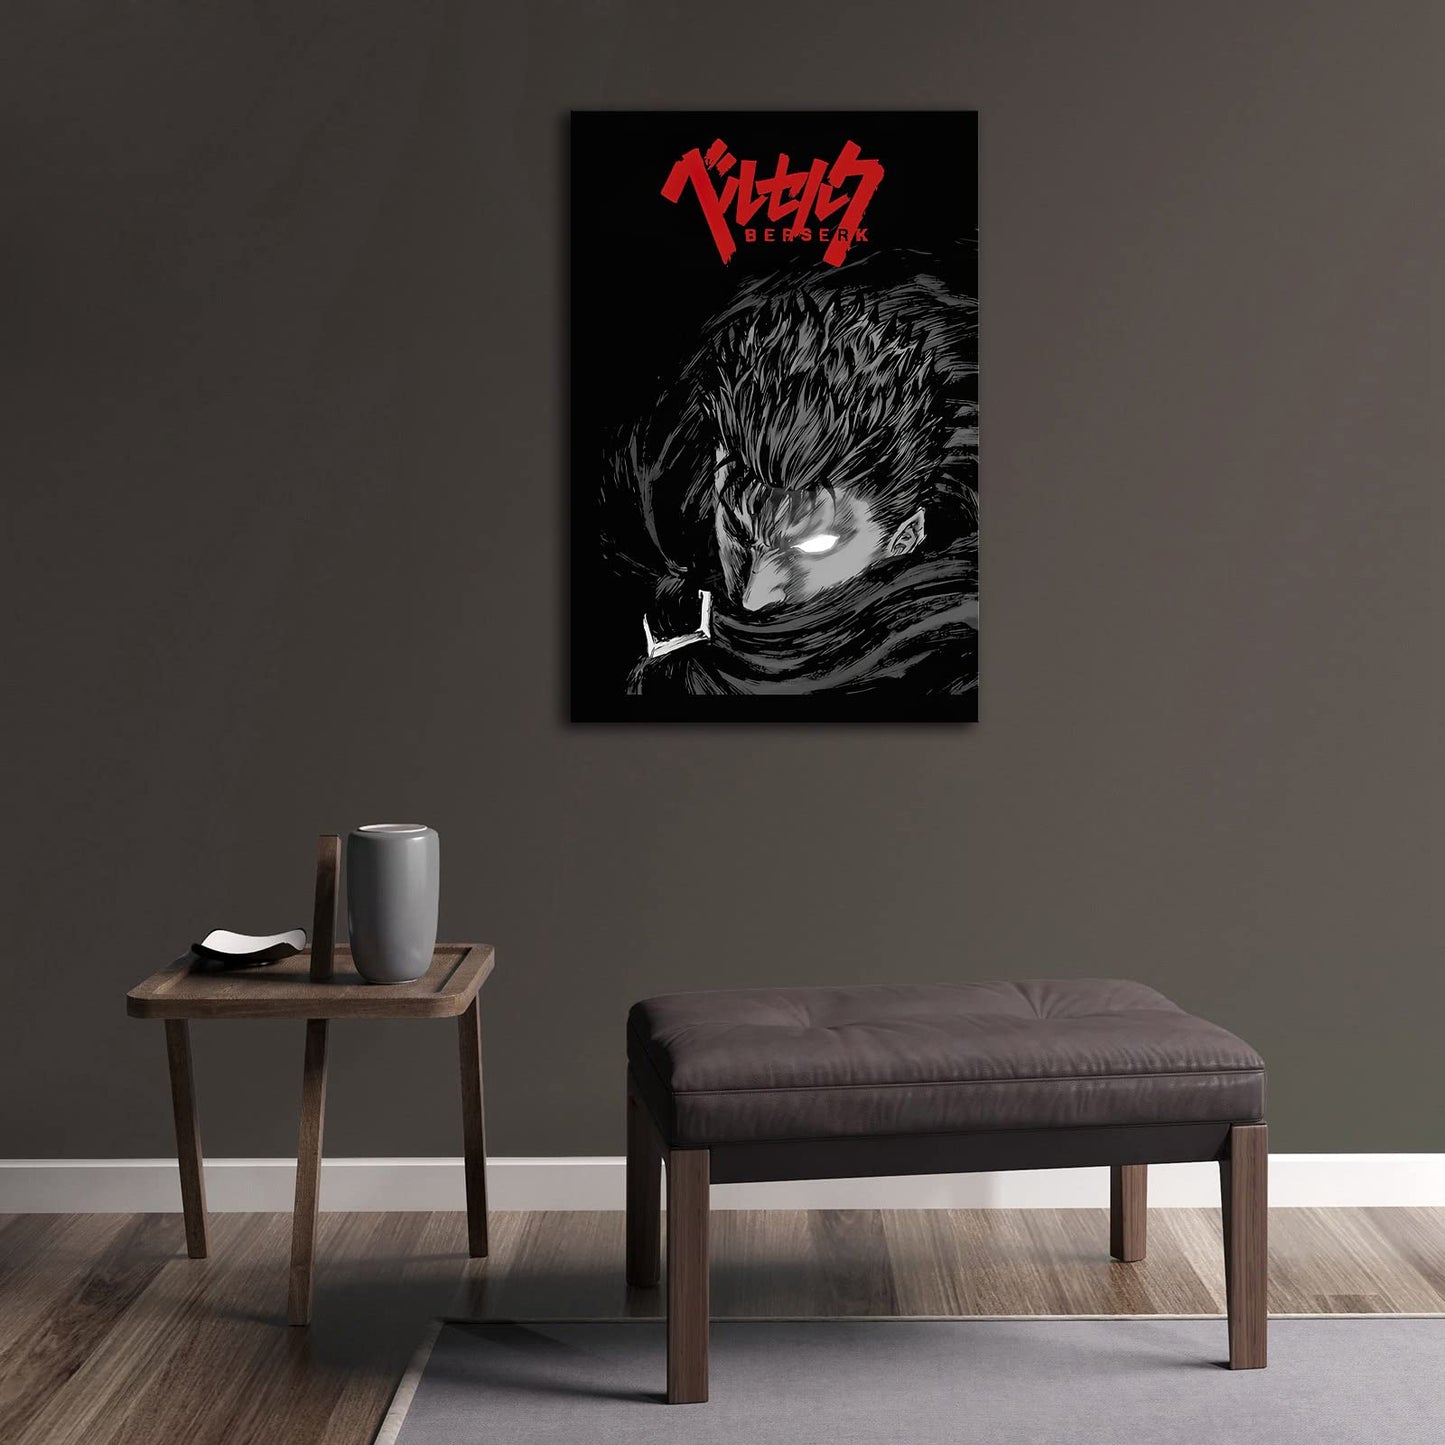 Anime Berserk Guts Red and Black HD Canvas Print Poster,Poster for Boys Room,Living Room Bedroom Wall Art Decor EMXEE (12x18 No Framed,A)